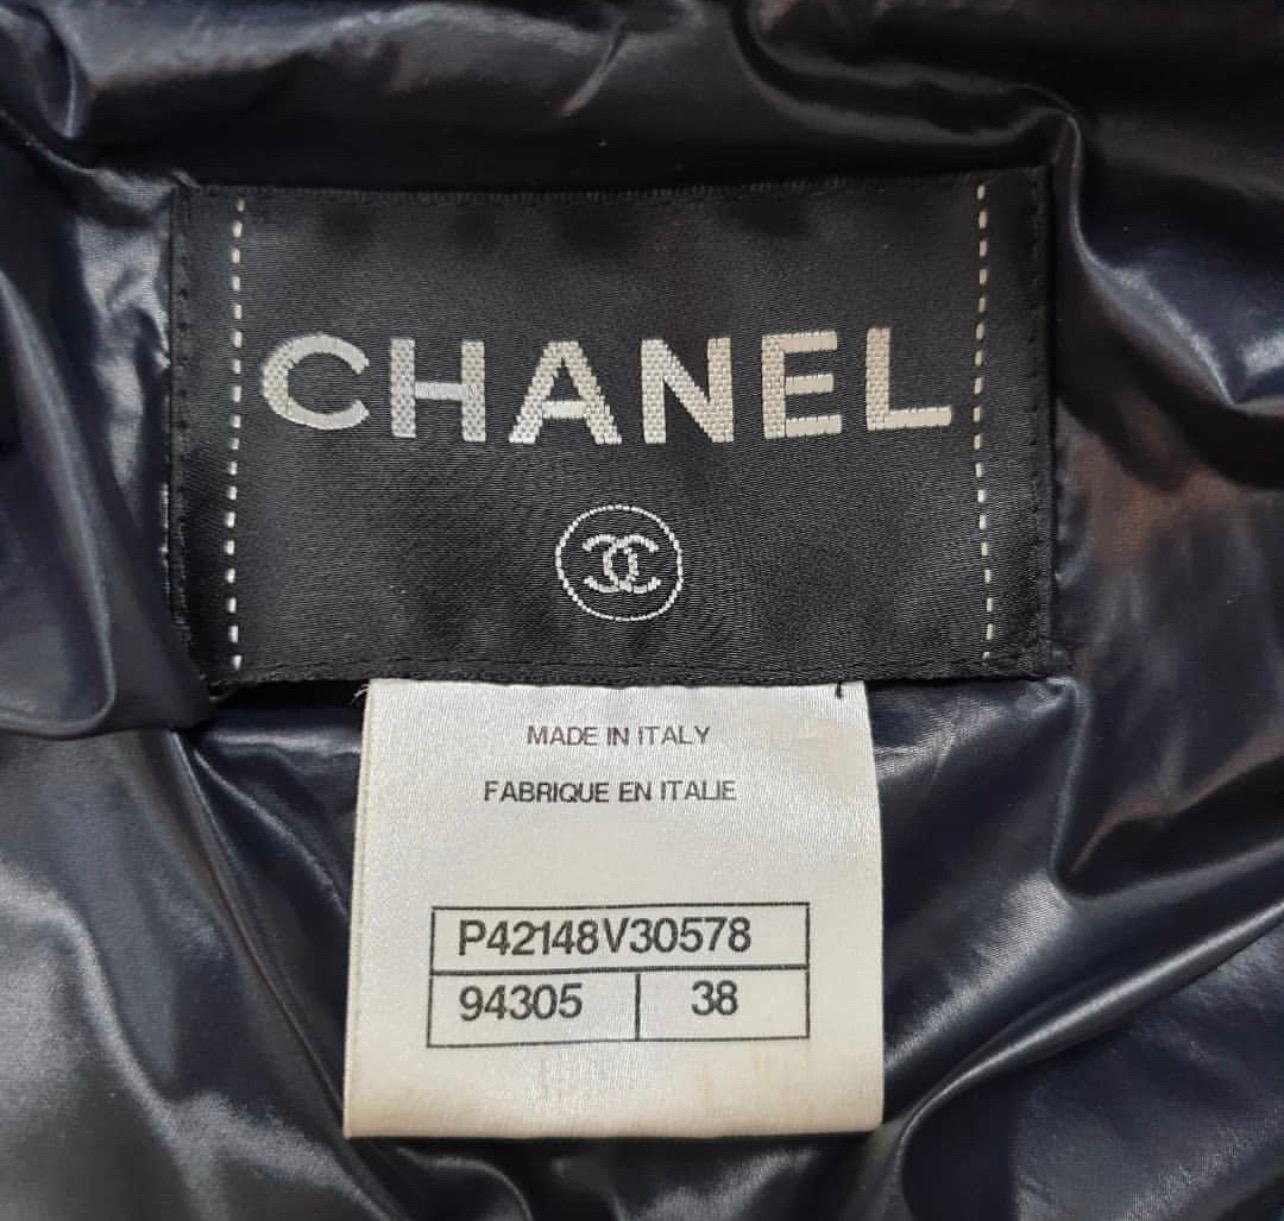 Chanel Black Quilted Puffer Jacket

Sz.38

Very good condition.